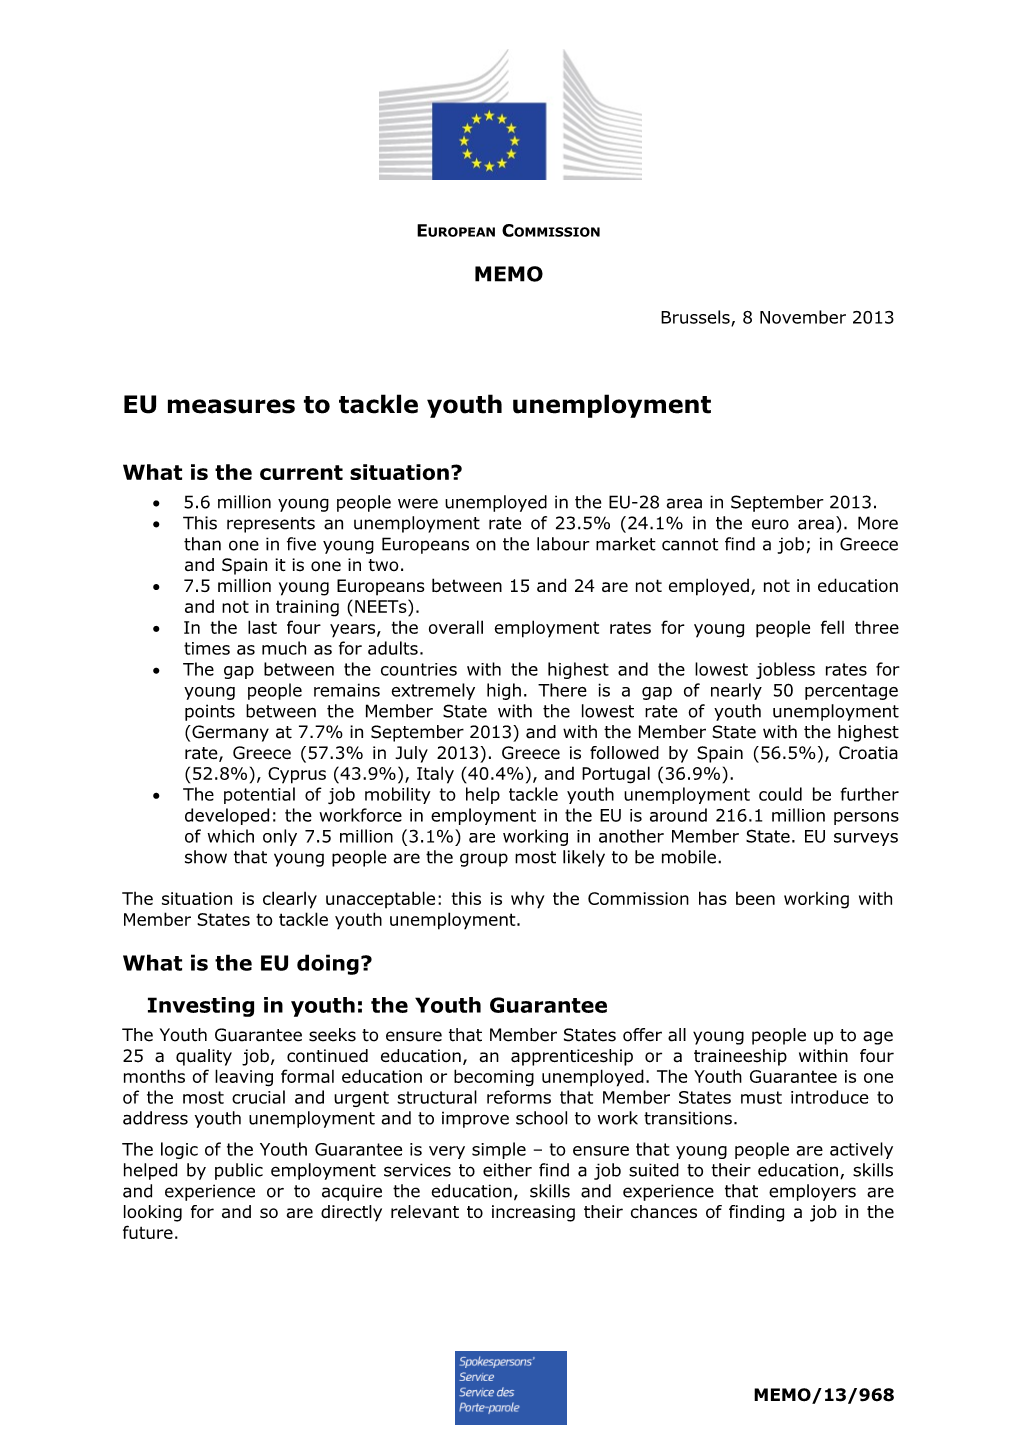 EU Measures to Tackle Youth Unemployment